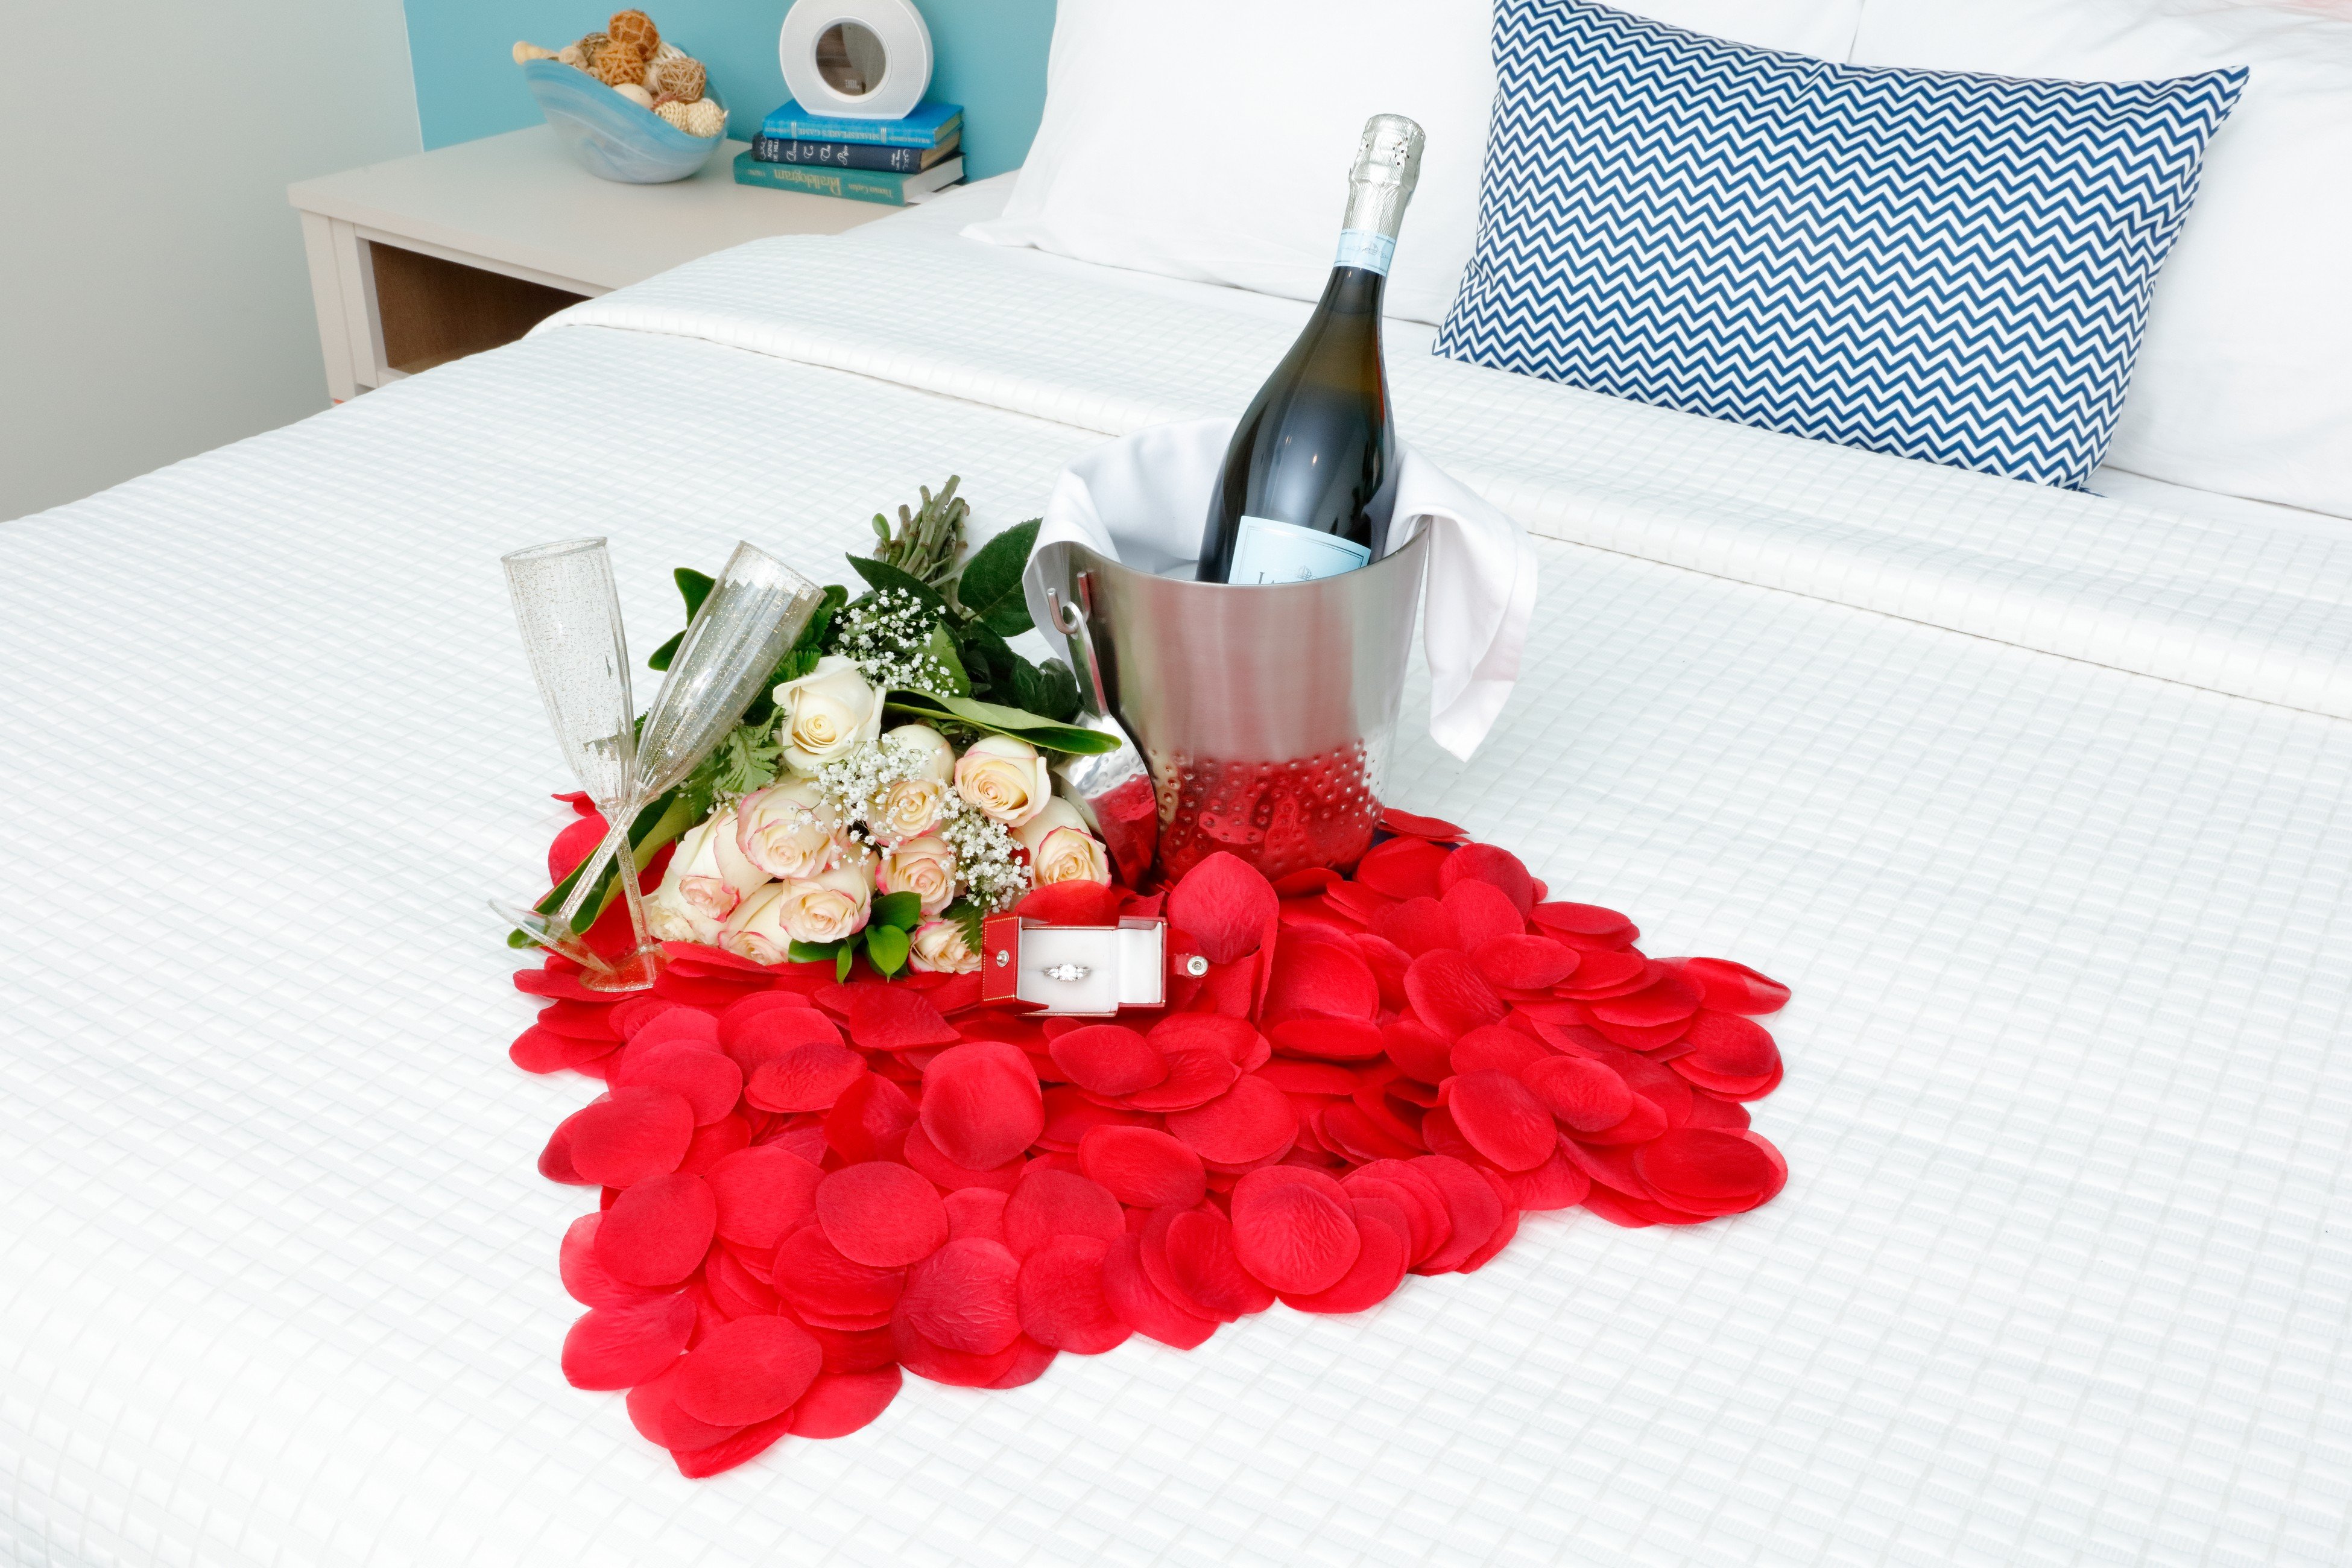 Let us customize a Romance Package for your stay!